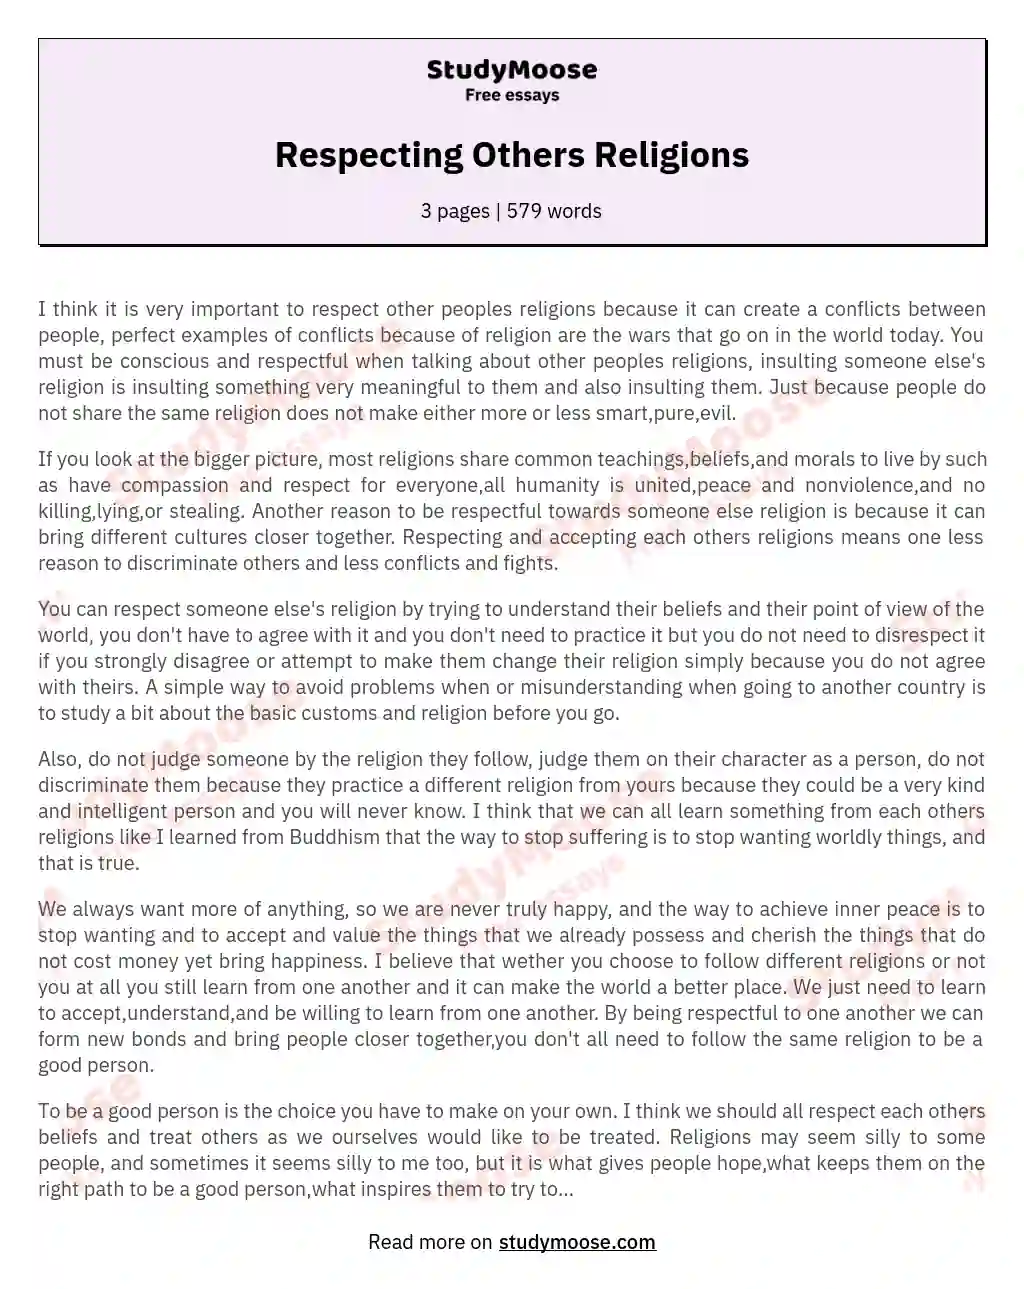 Respecting Others Religions essay